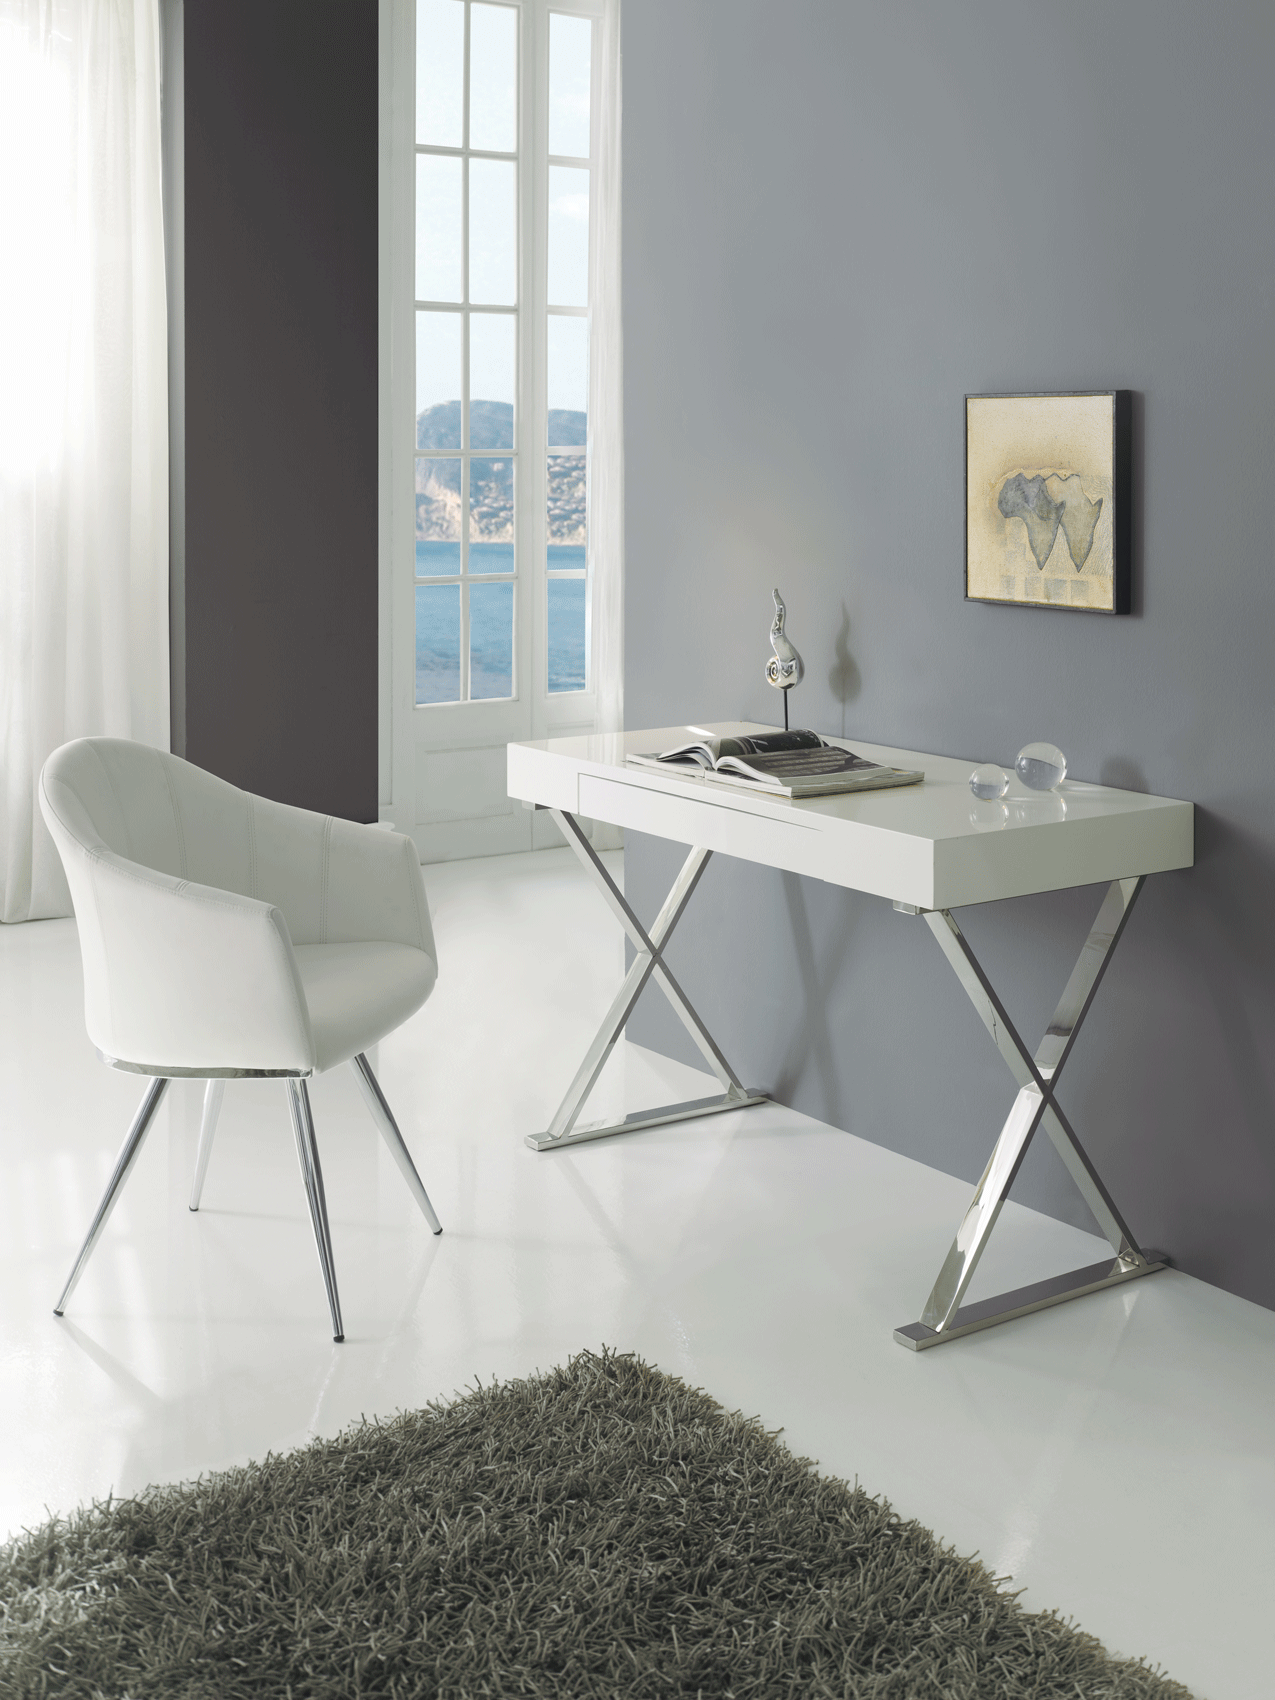 Wallunits Hallway Console tables and Mirrors DK-901/DC-110, DK-240/PC-107